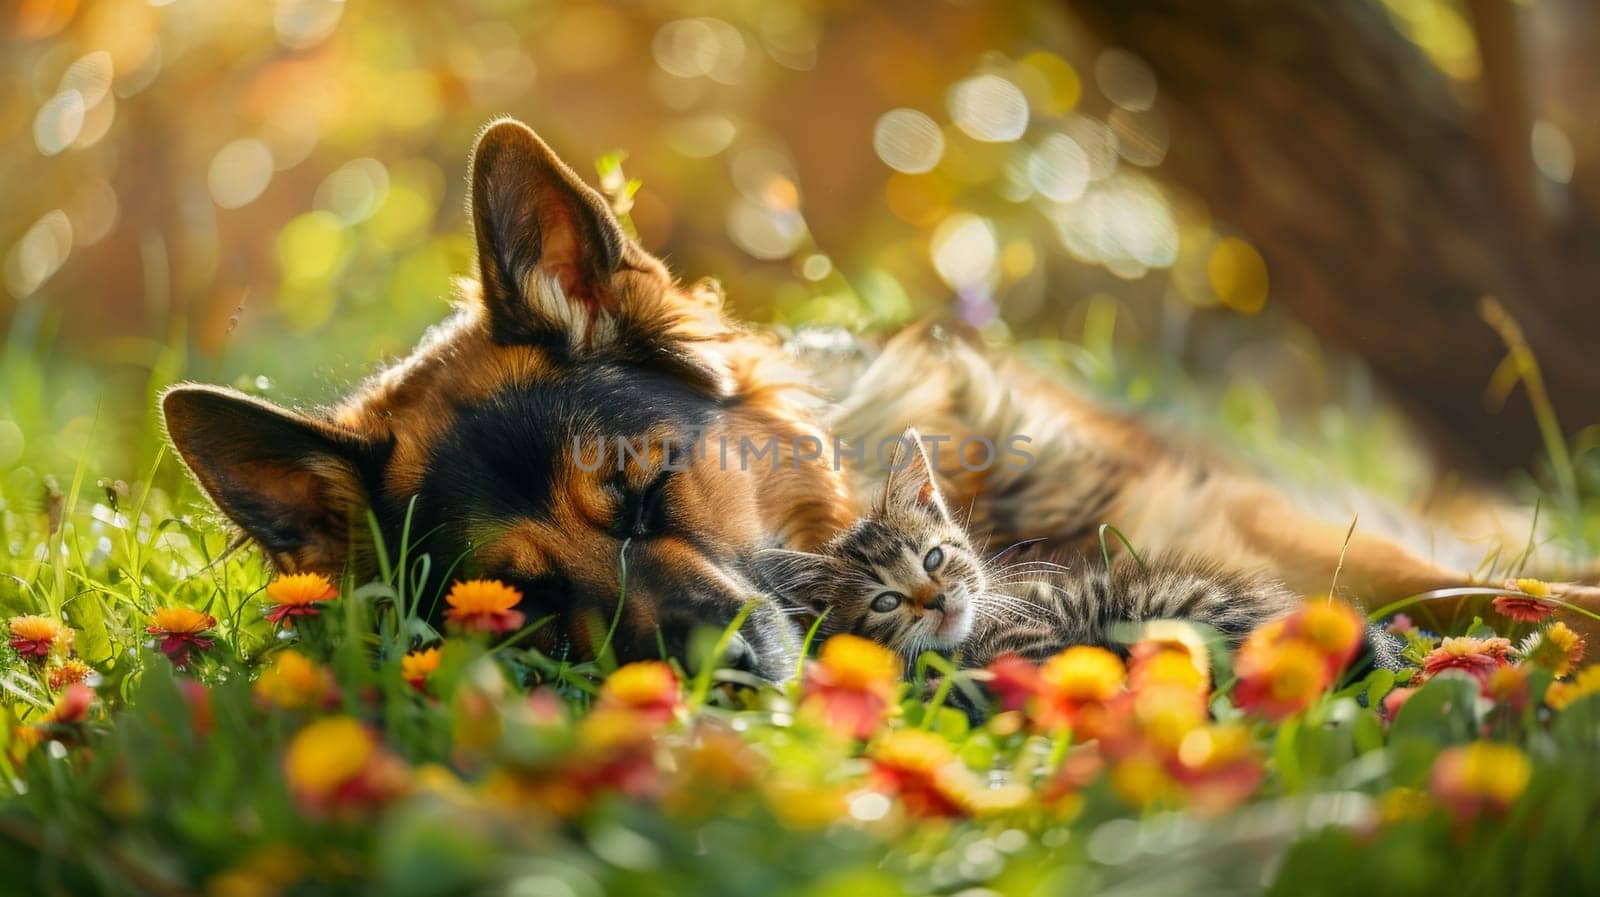 dog and kitten lying closely together in the grass and flower under the tree with sunlit on summer by nijieimu